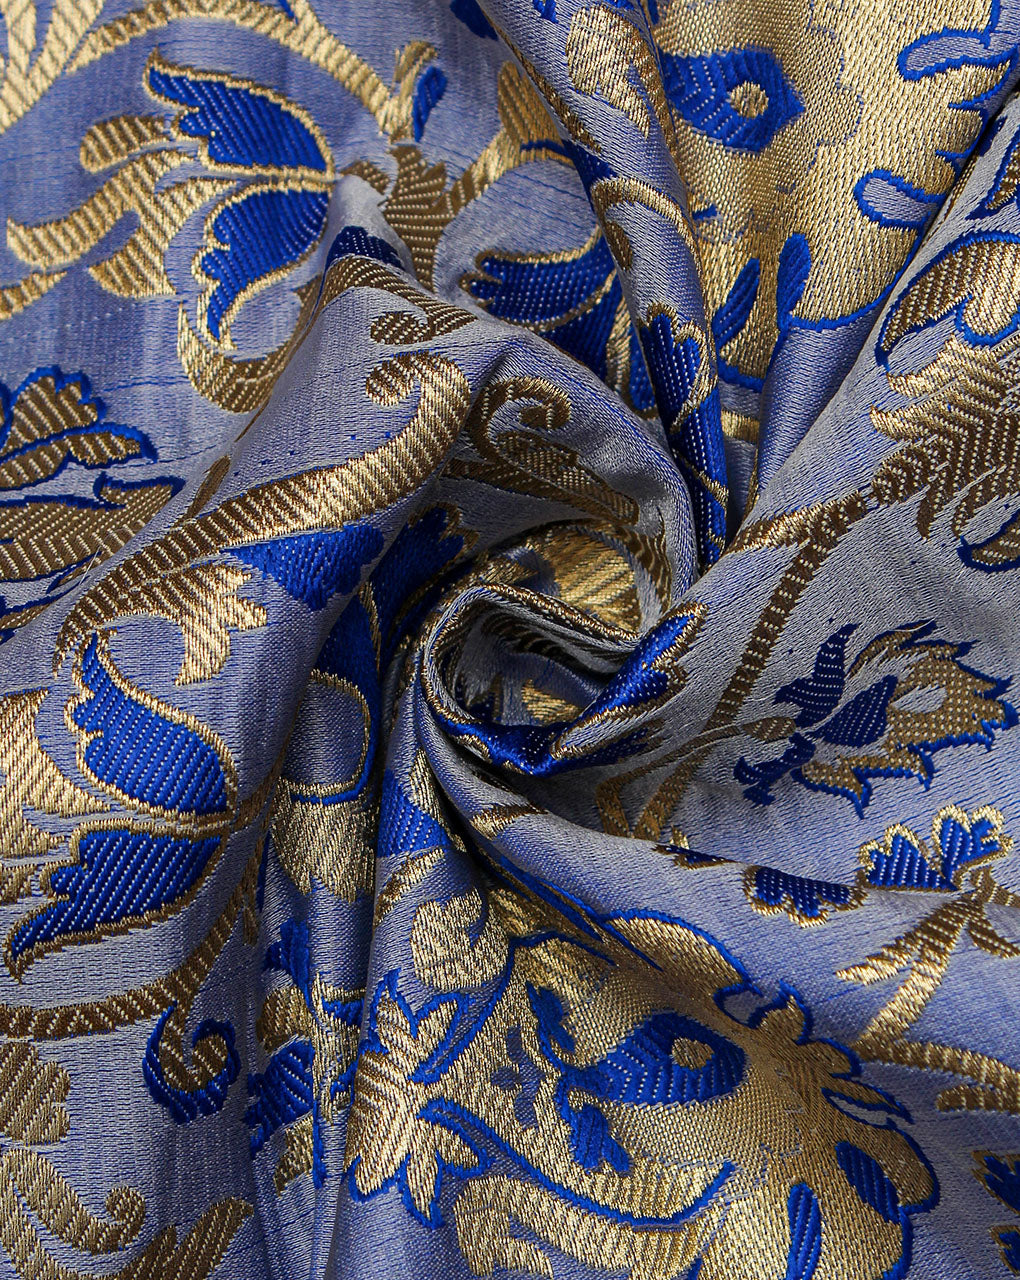 Royal Blue And Golden Floral Design Polyester Brocade Fabric